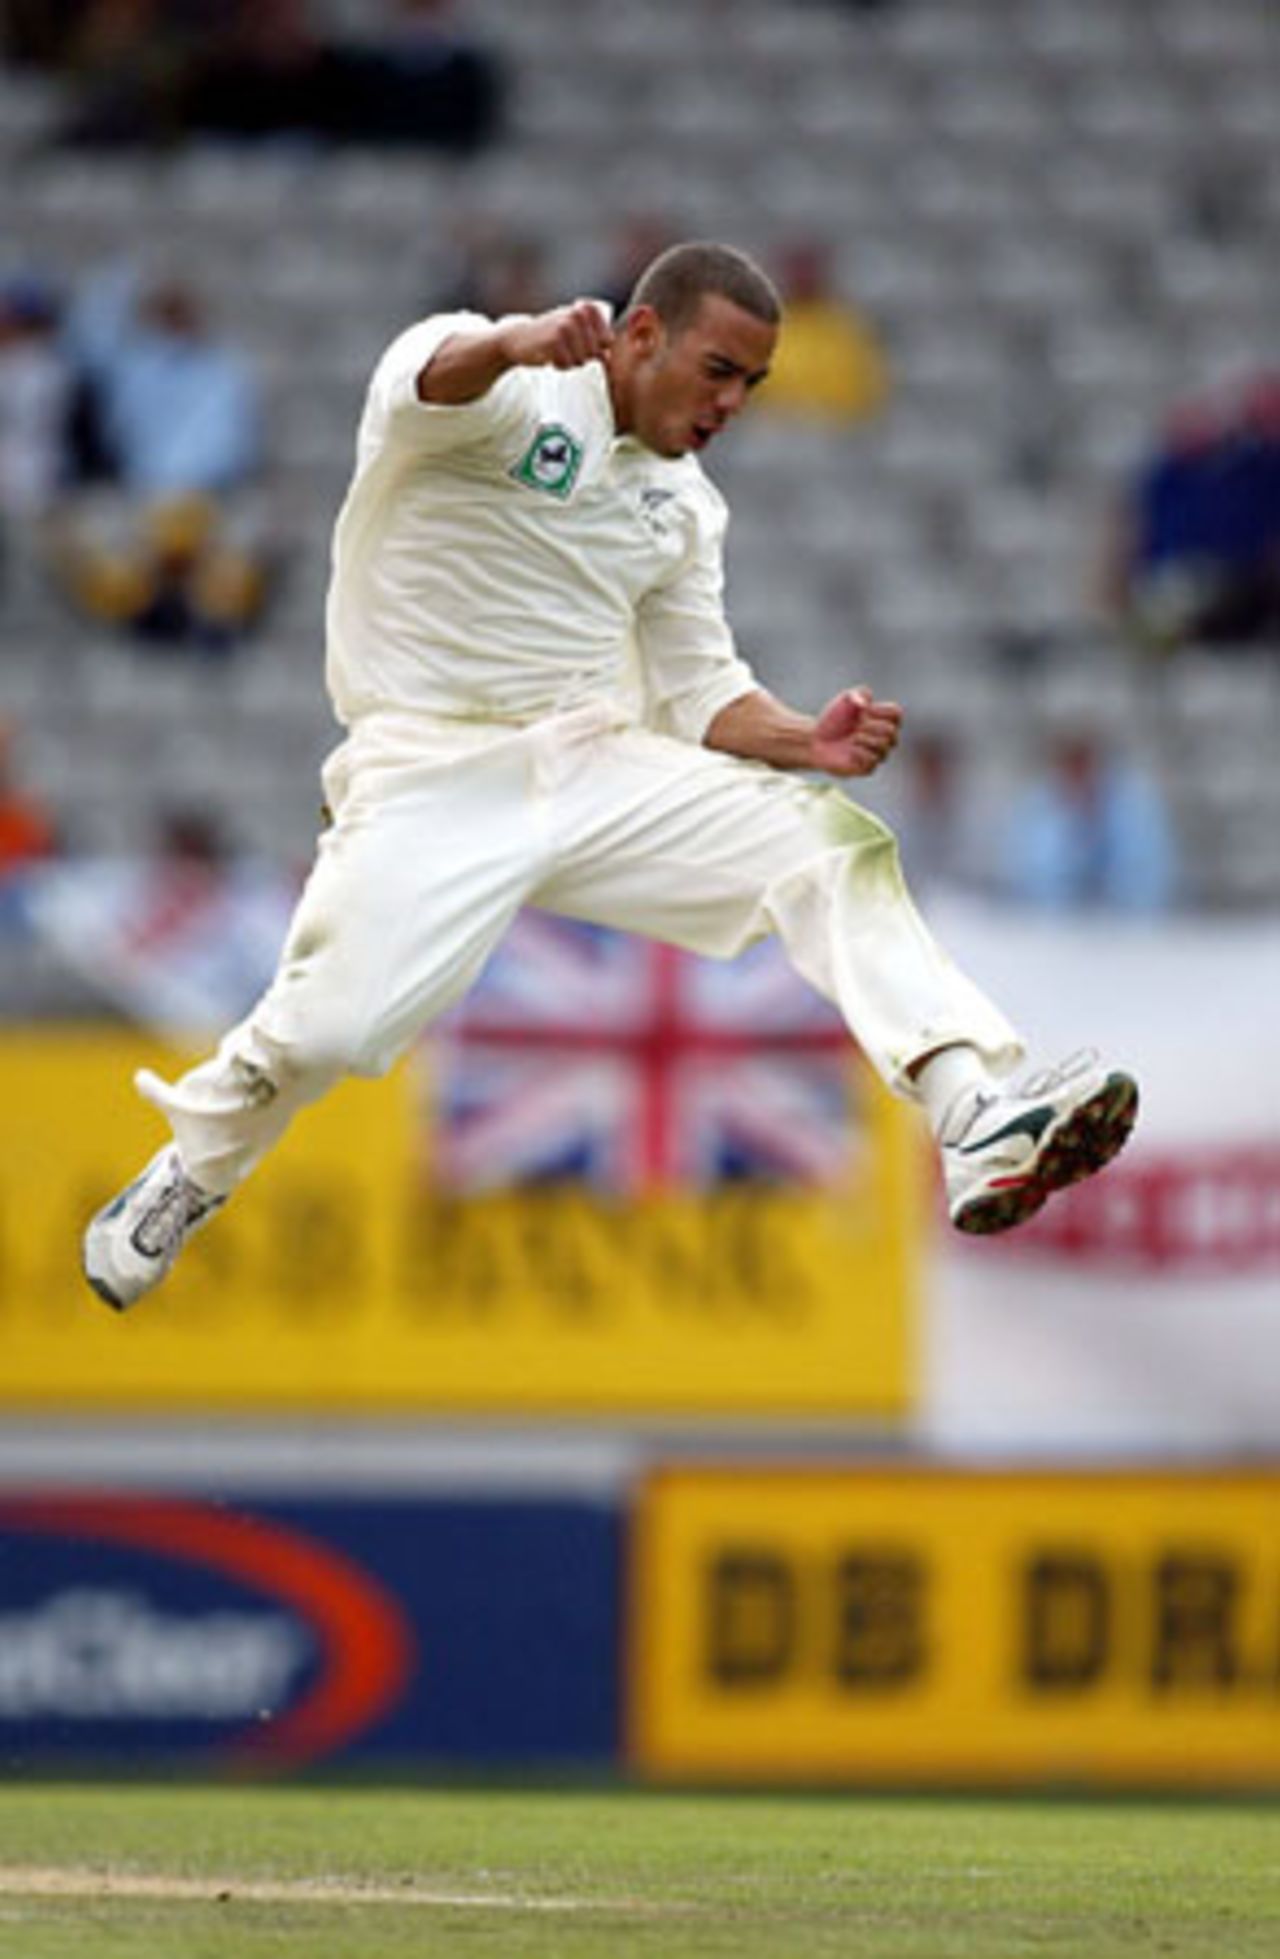 New Zealand bowler Andre Adams jumps to celebrate the dismissal of England batsman James Foster, caught by wicket-keeper Adam Parore his second innings for 23. 3rd Test: New Zealand v England at Eden Park, Auckland, 30 March-3 April 2002 (3 April 2002).